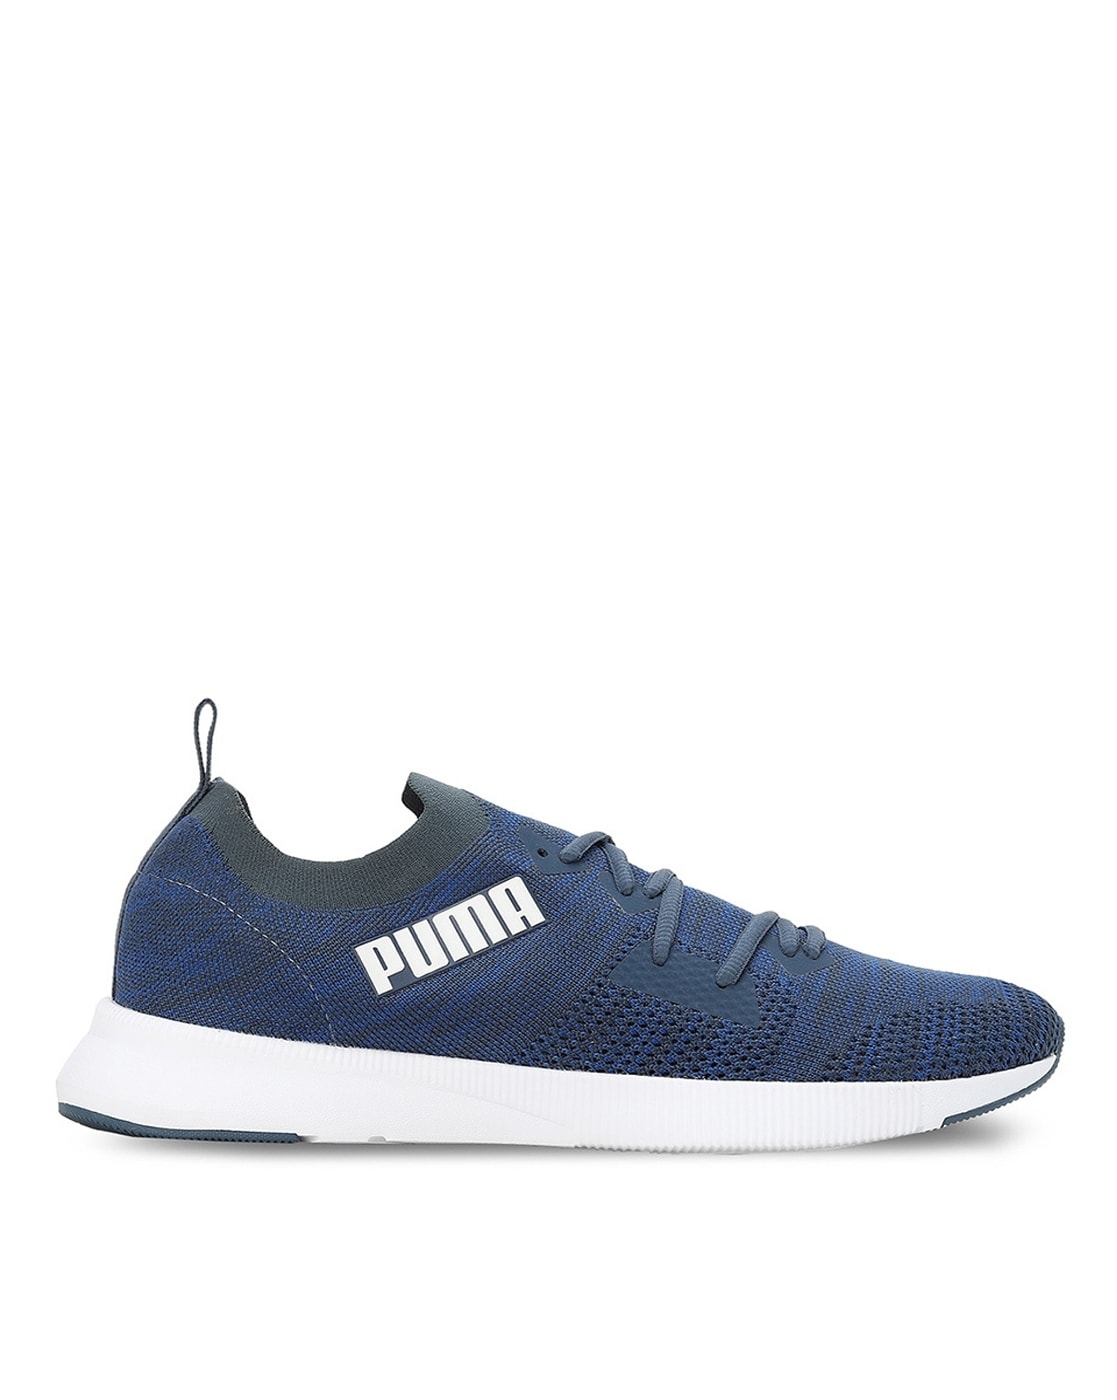 Buy Puma Ignite Contender Knit Black Running Shoes for Men at Best Price @  Tata CLiQ